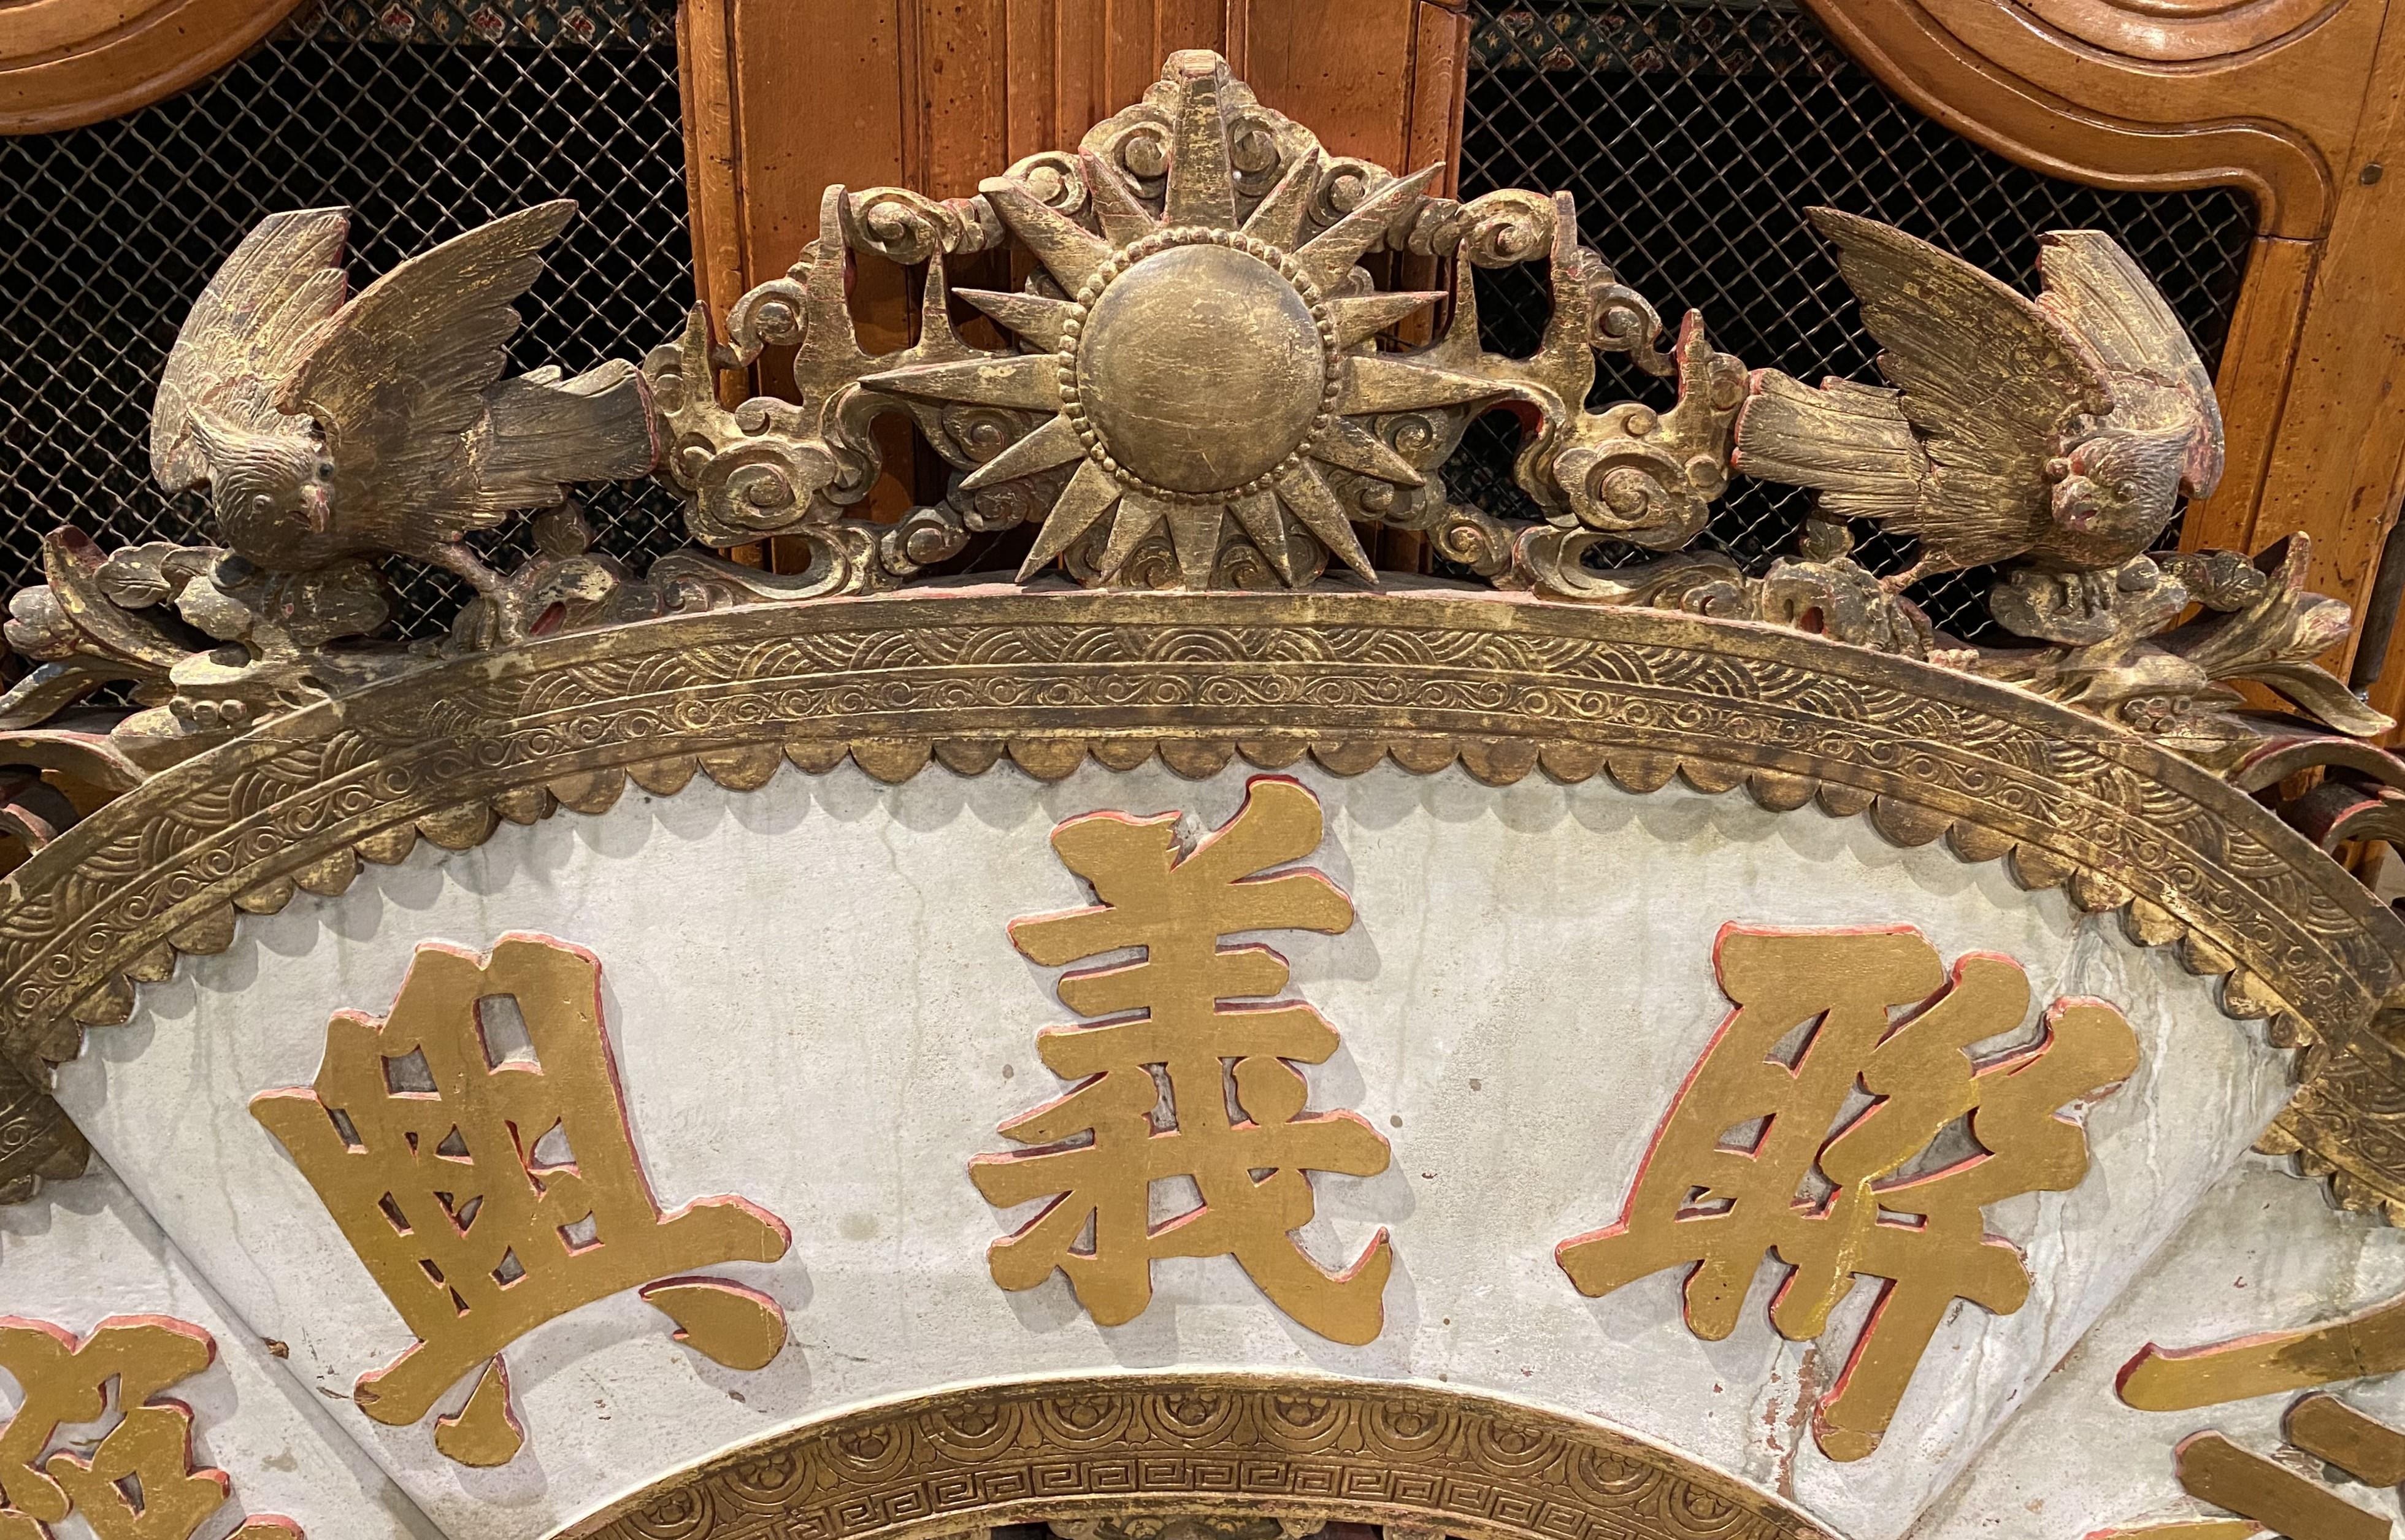 A fine Chinese decorative carved wooden architectural pediment, most likely from a temple, its crest featuring a gilt carved center star flanked by pierce carved birds, flowers, scrollwork, and dragons. Large Chinese gilt symbols appear across the